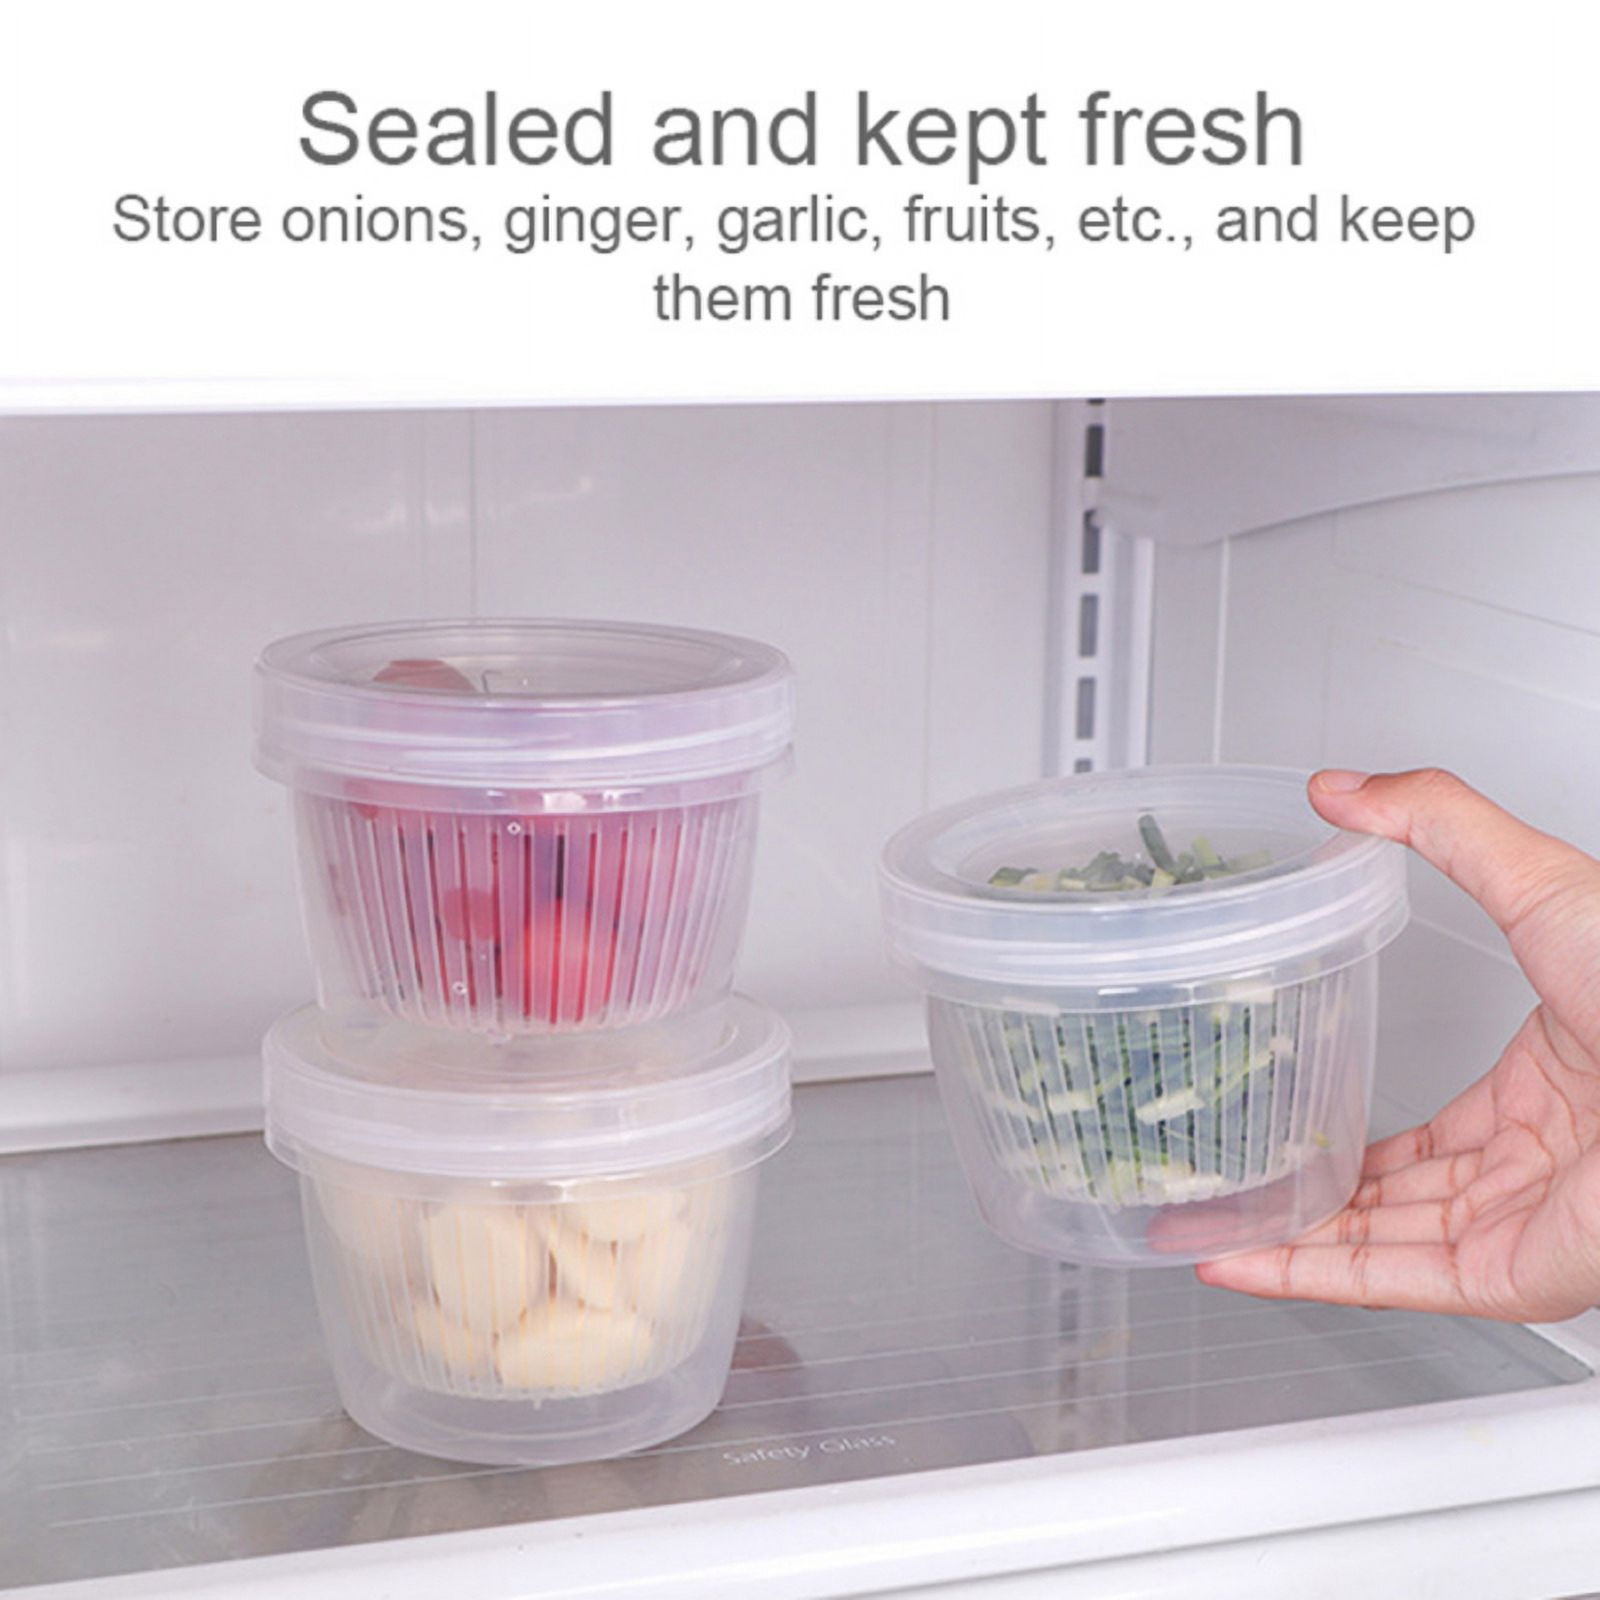 Signora Ware Fresh Fruit and Vegetable Food Keeper Saver Storage Container with Air Vented Lids Large Produce Keeper Dishwasher, Freezer, Refrigerator